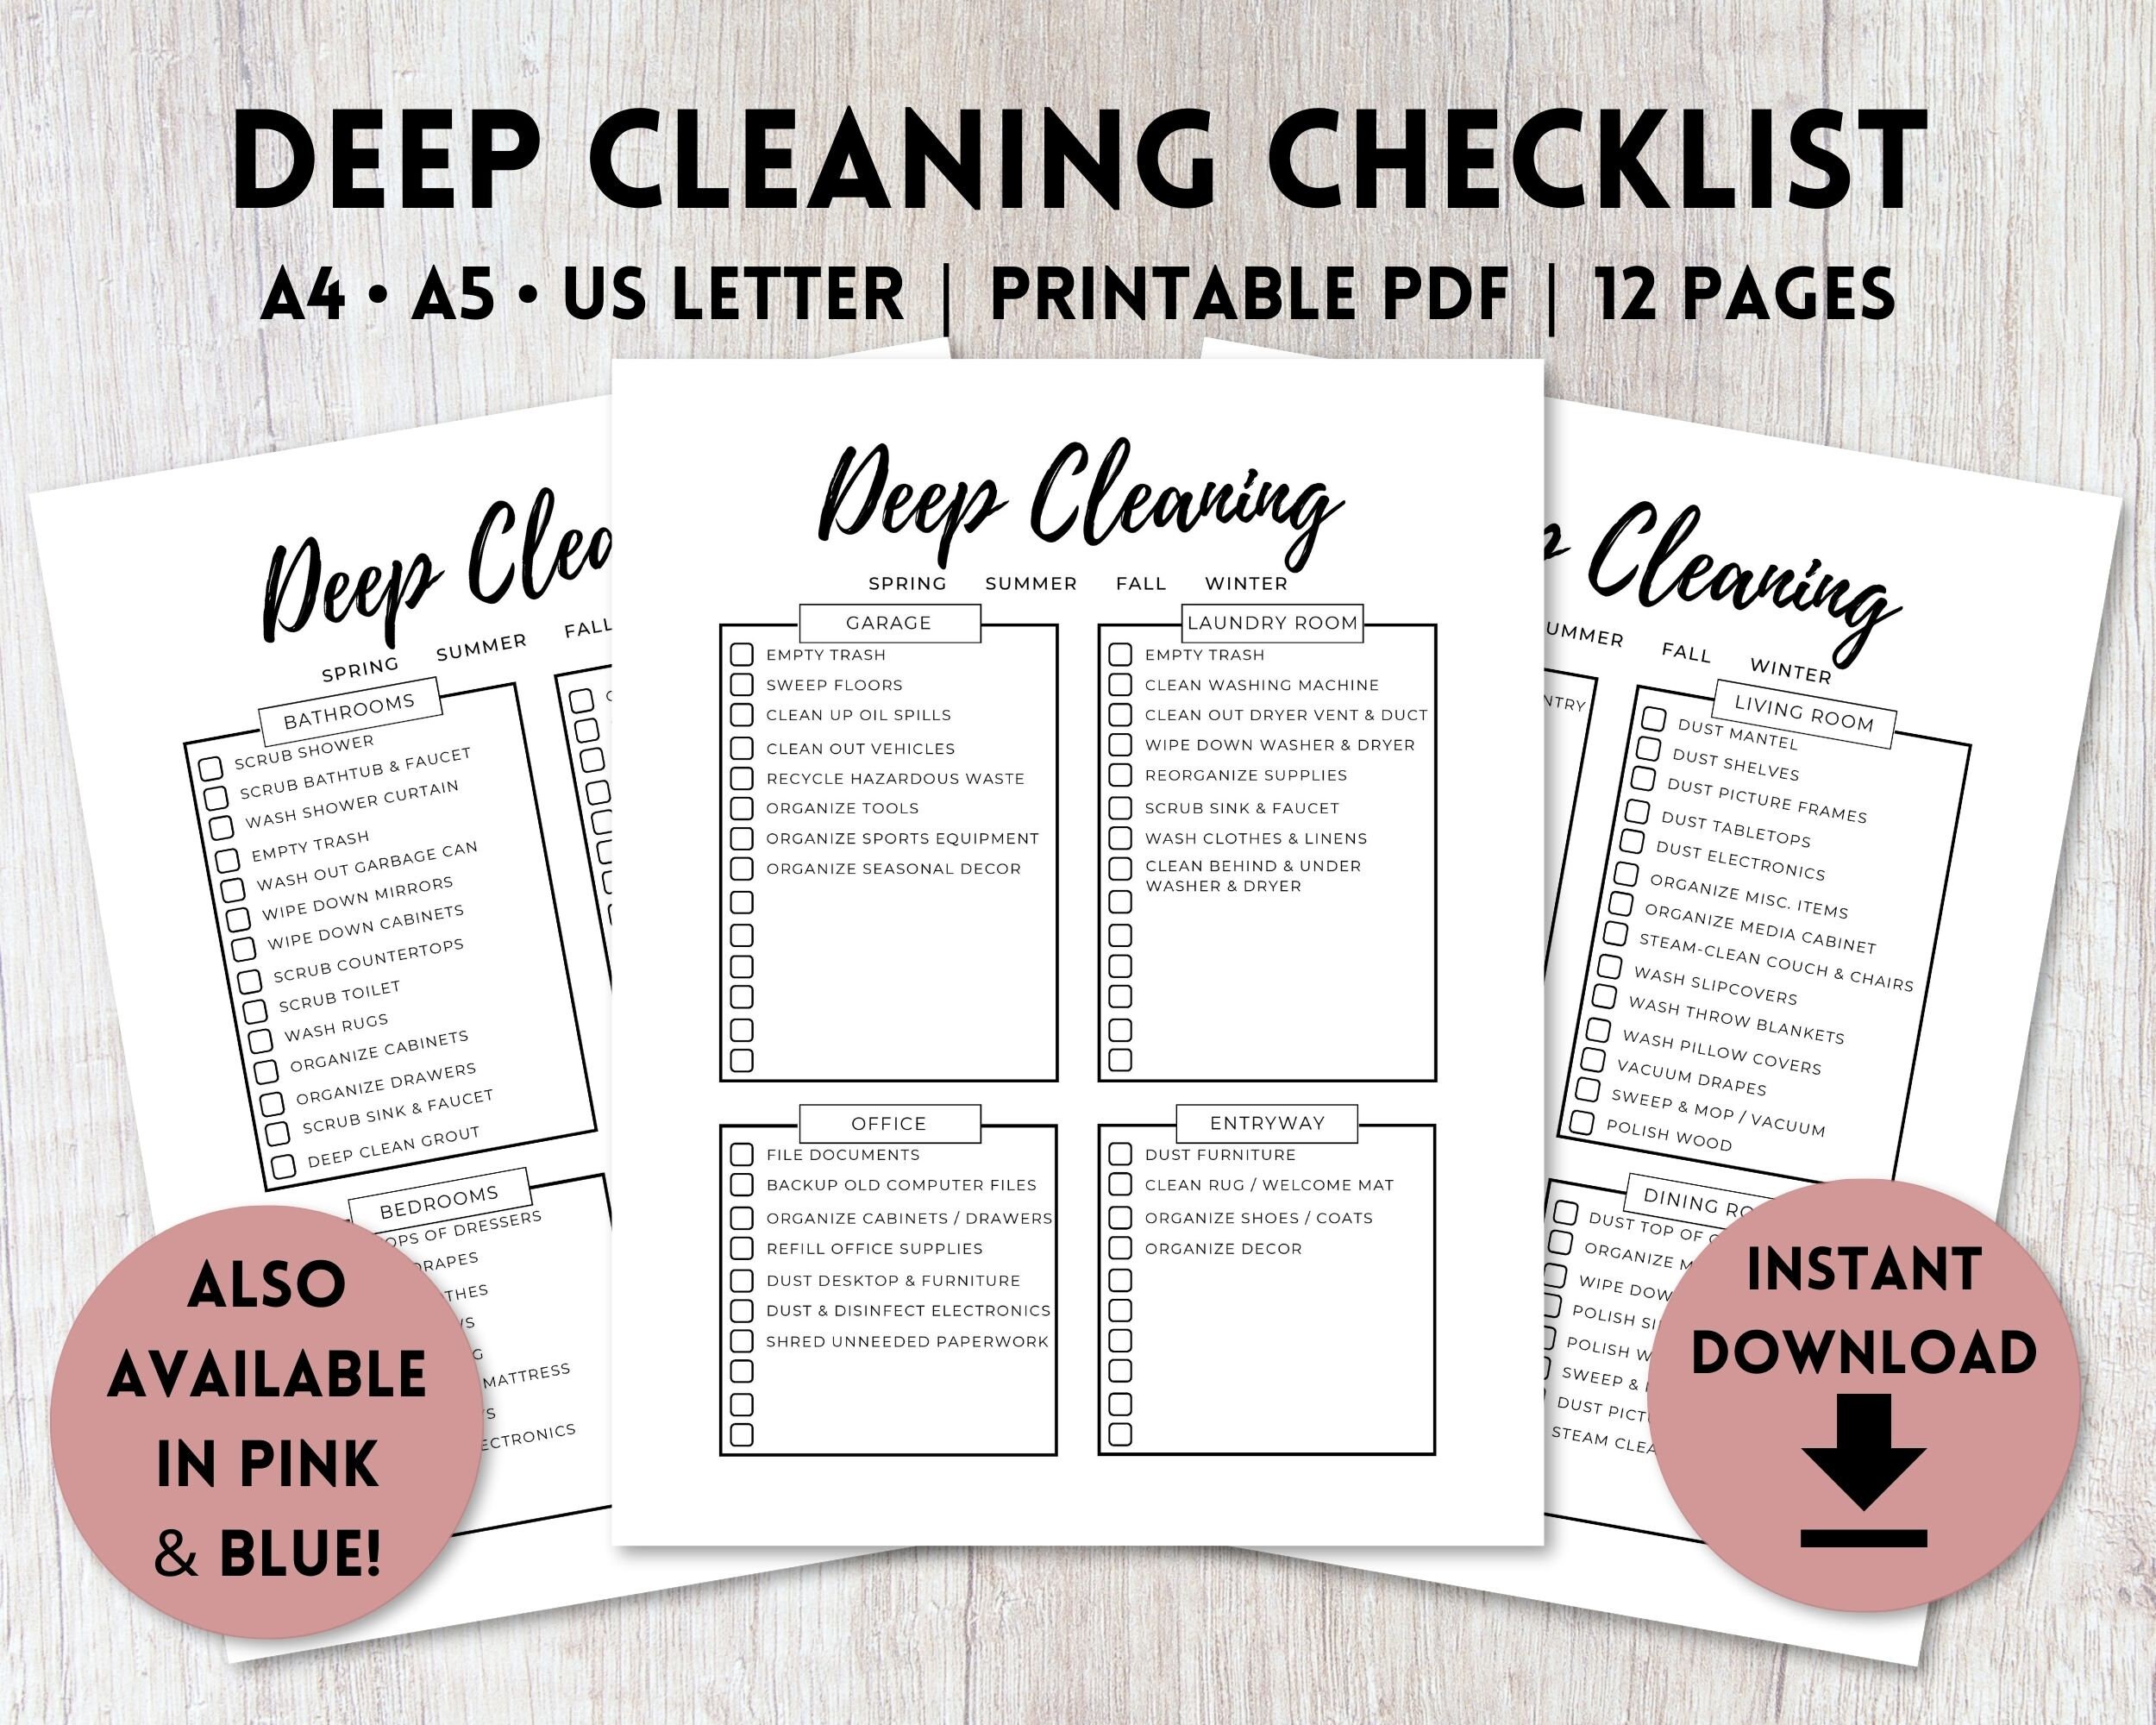 deep-cleaning-checklist-printable-pdf-spring-cleaning-etsy